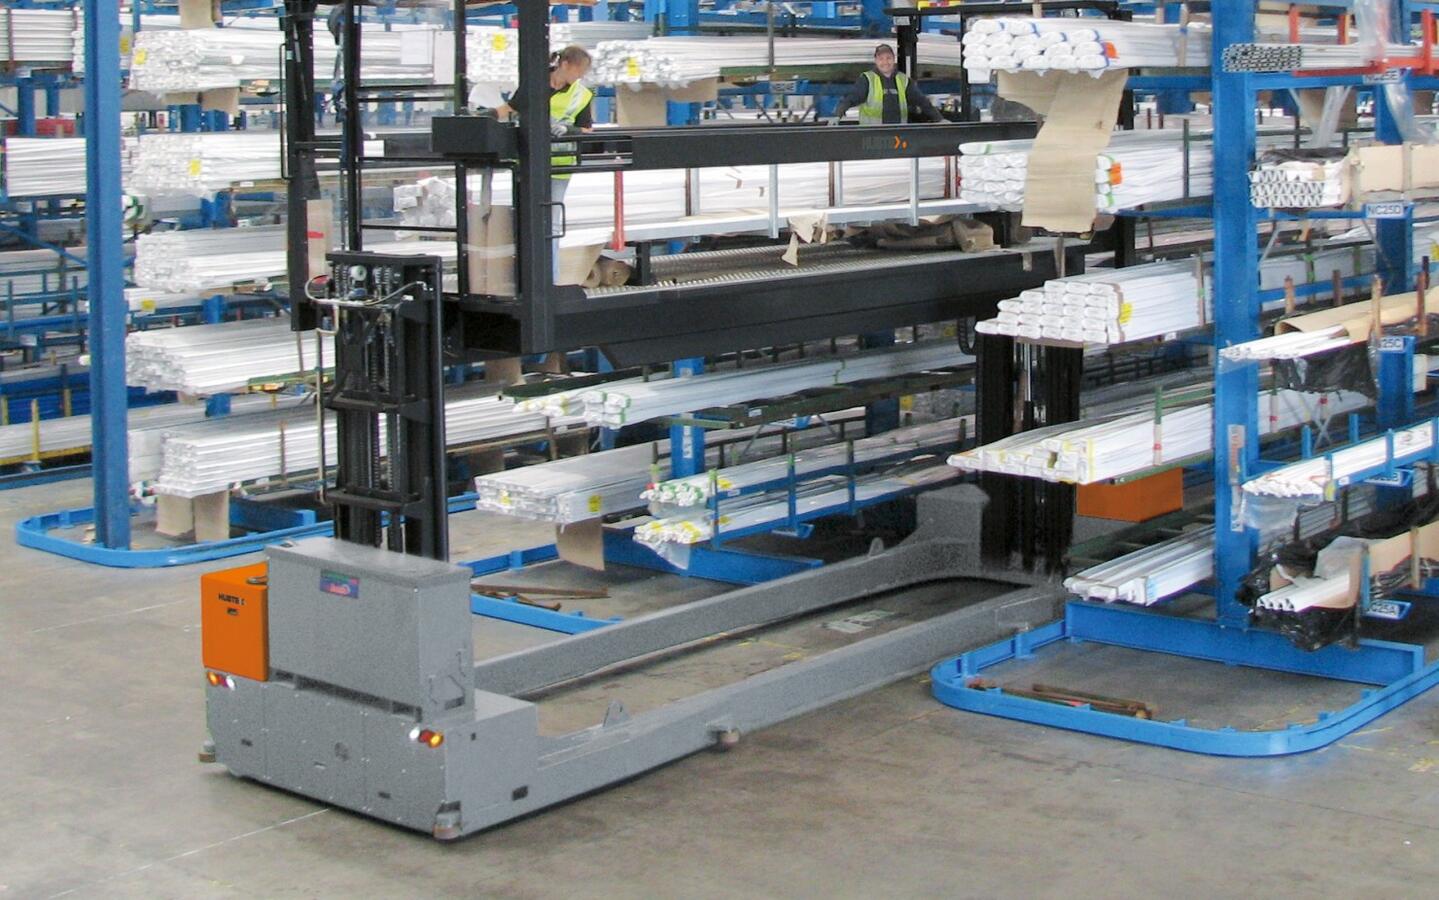 The HUBTEX electric two-side order picking platform in the 2-mast version